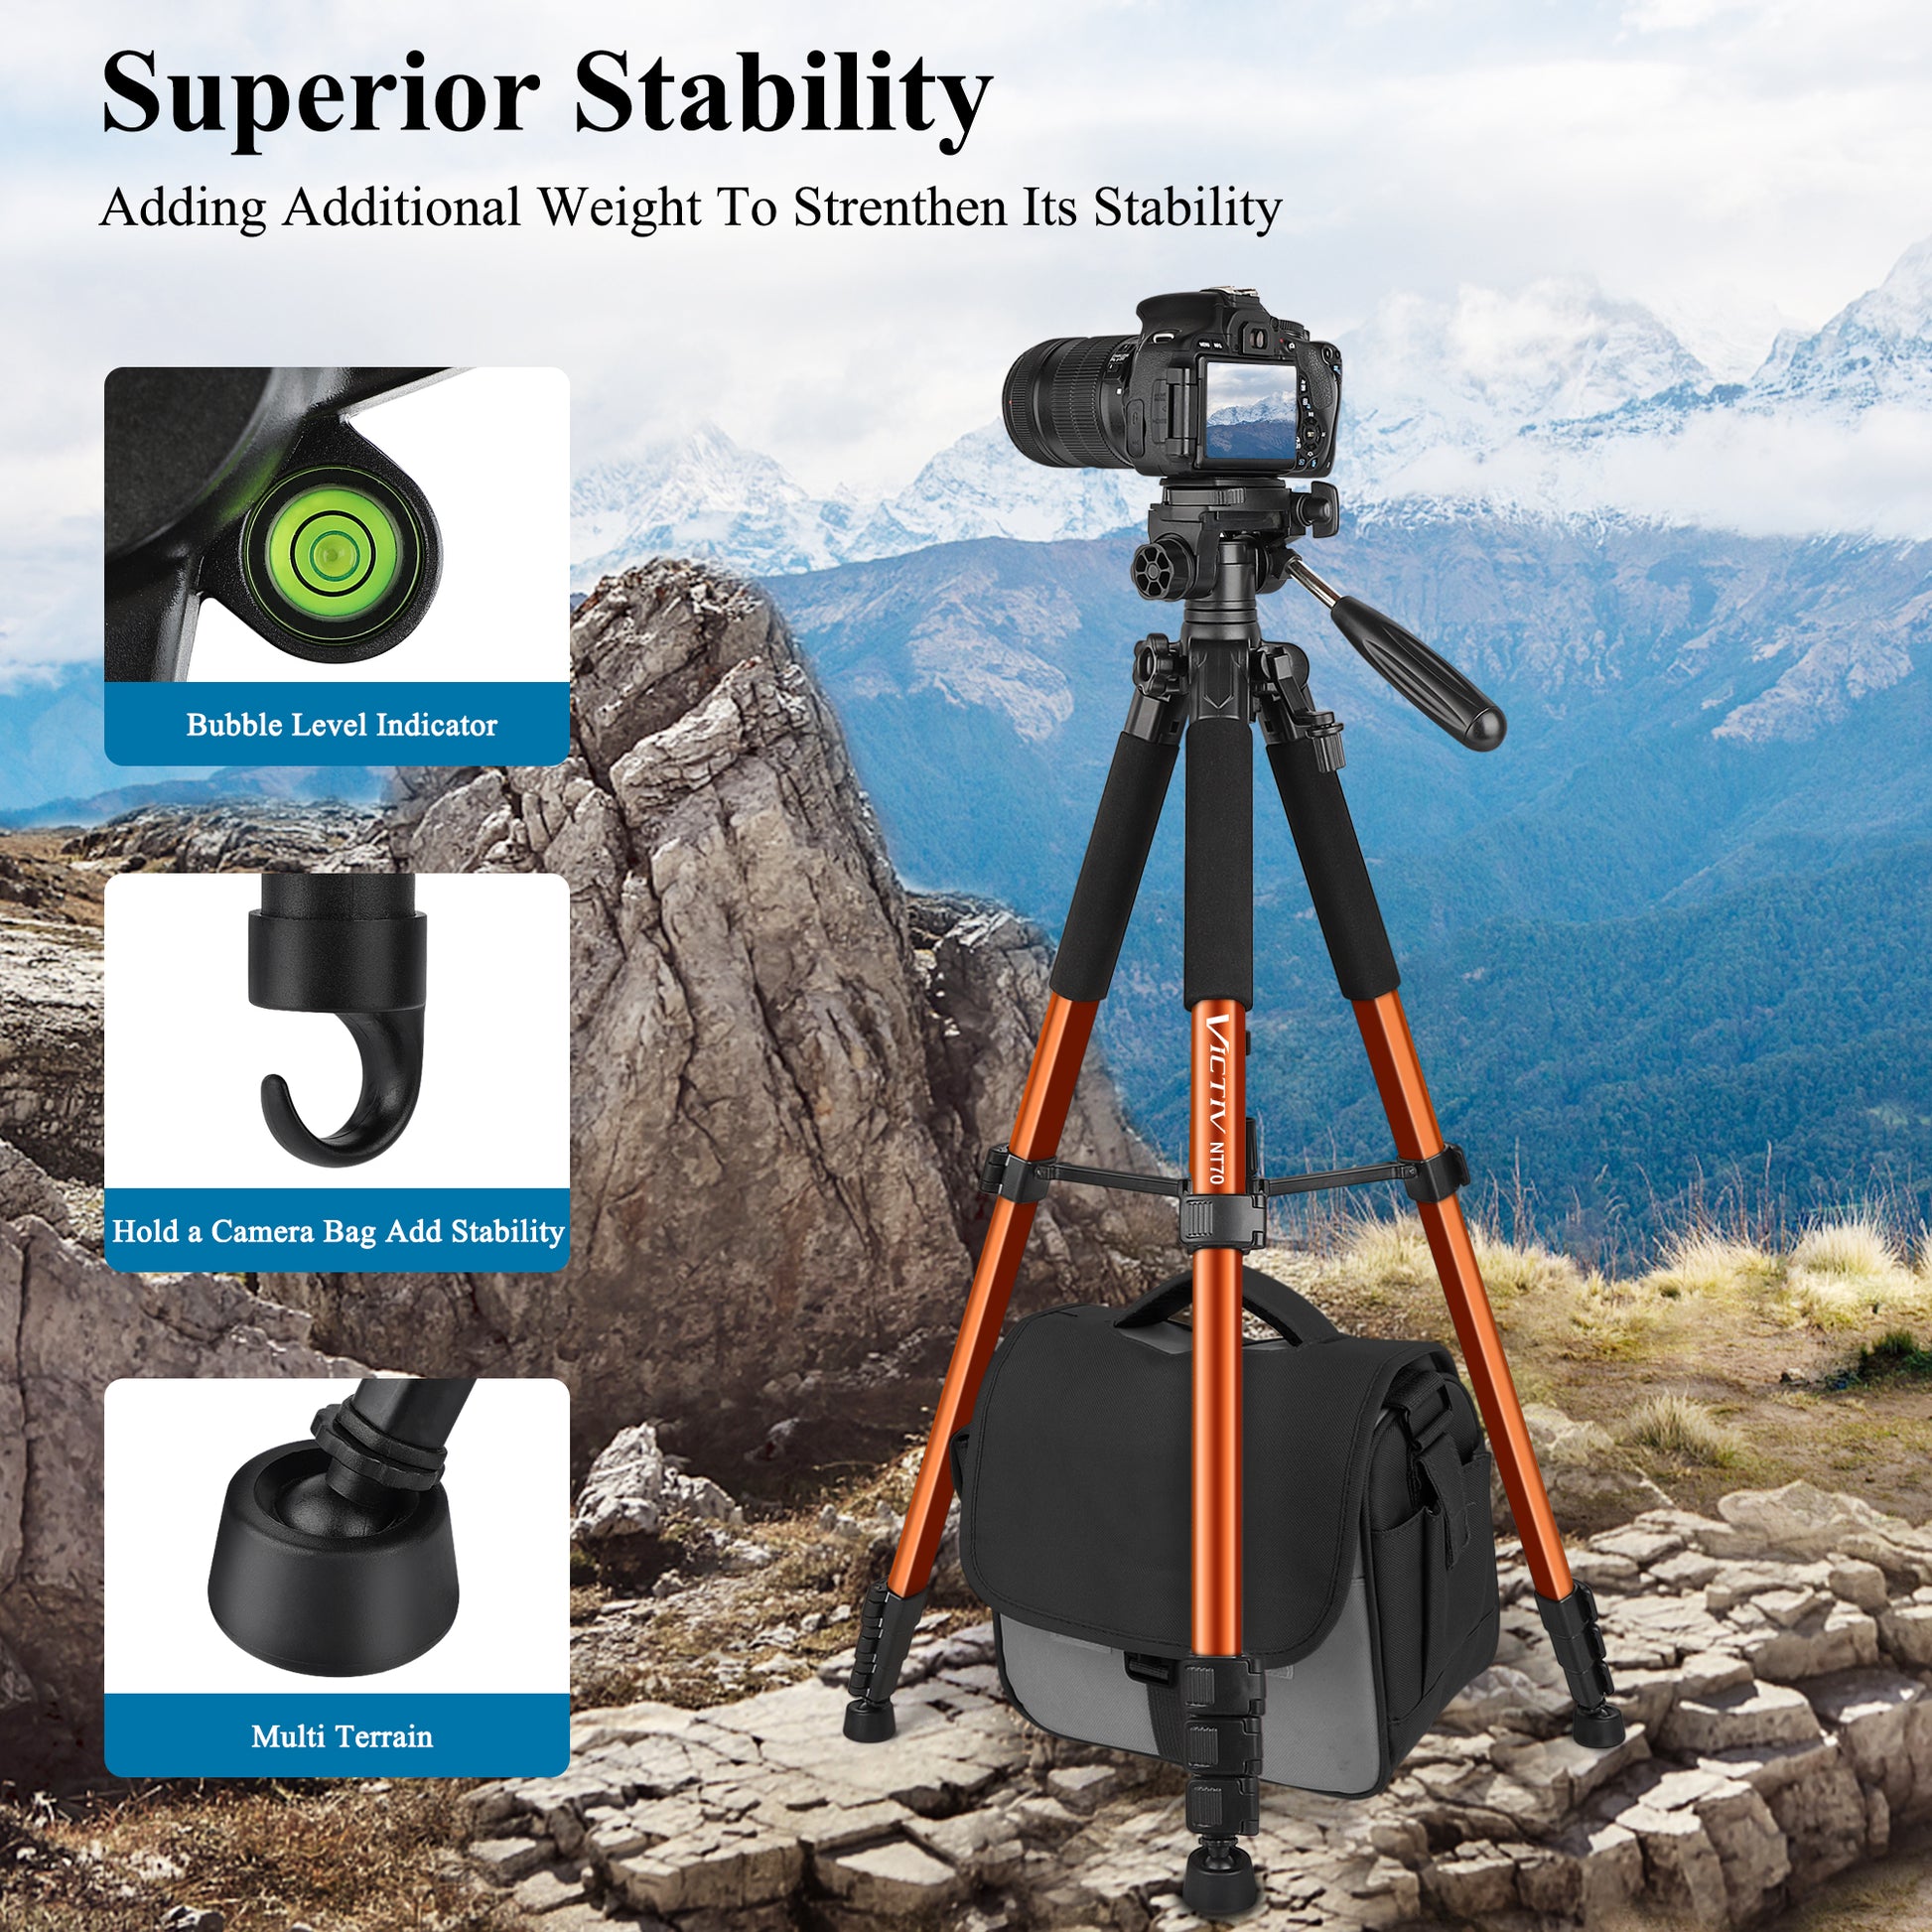 High Quality Tripod Weight Bag at Best Prices